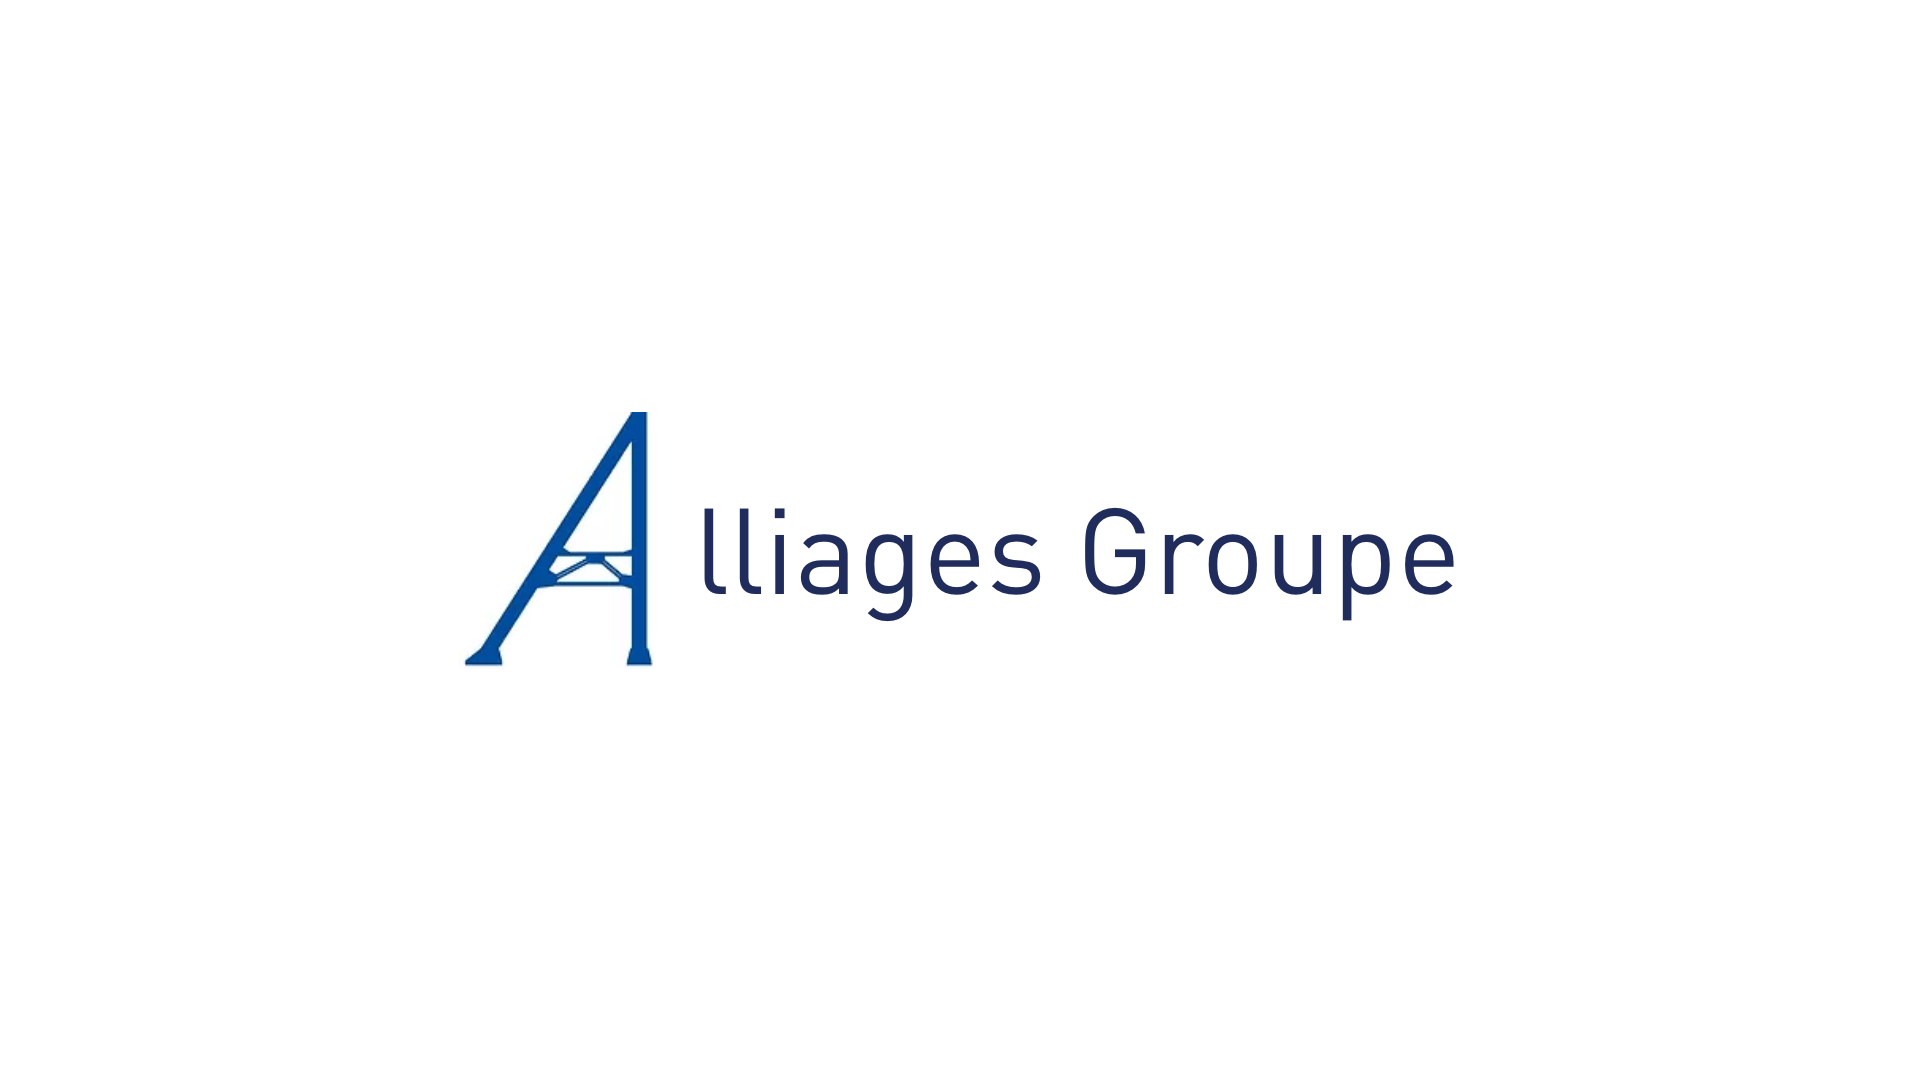 Jobs at Alliages Groupe via Adecco